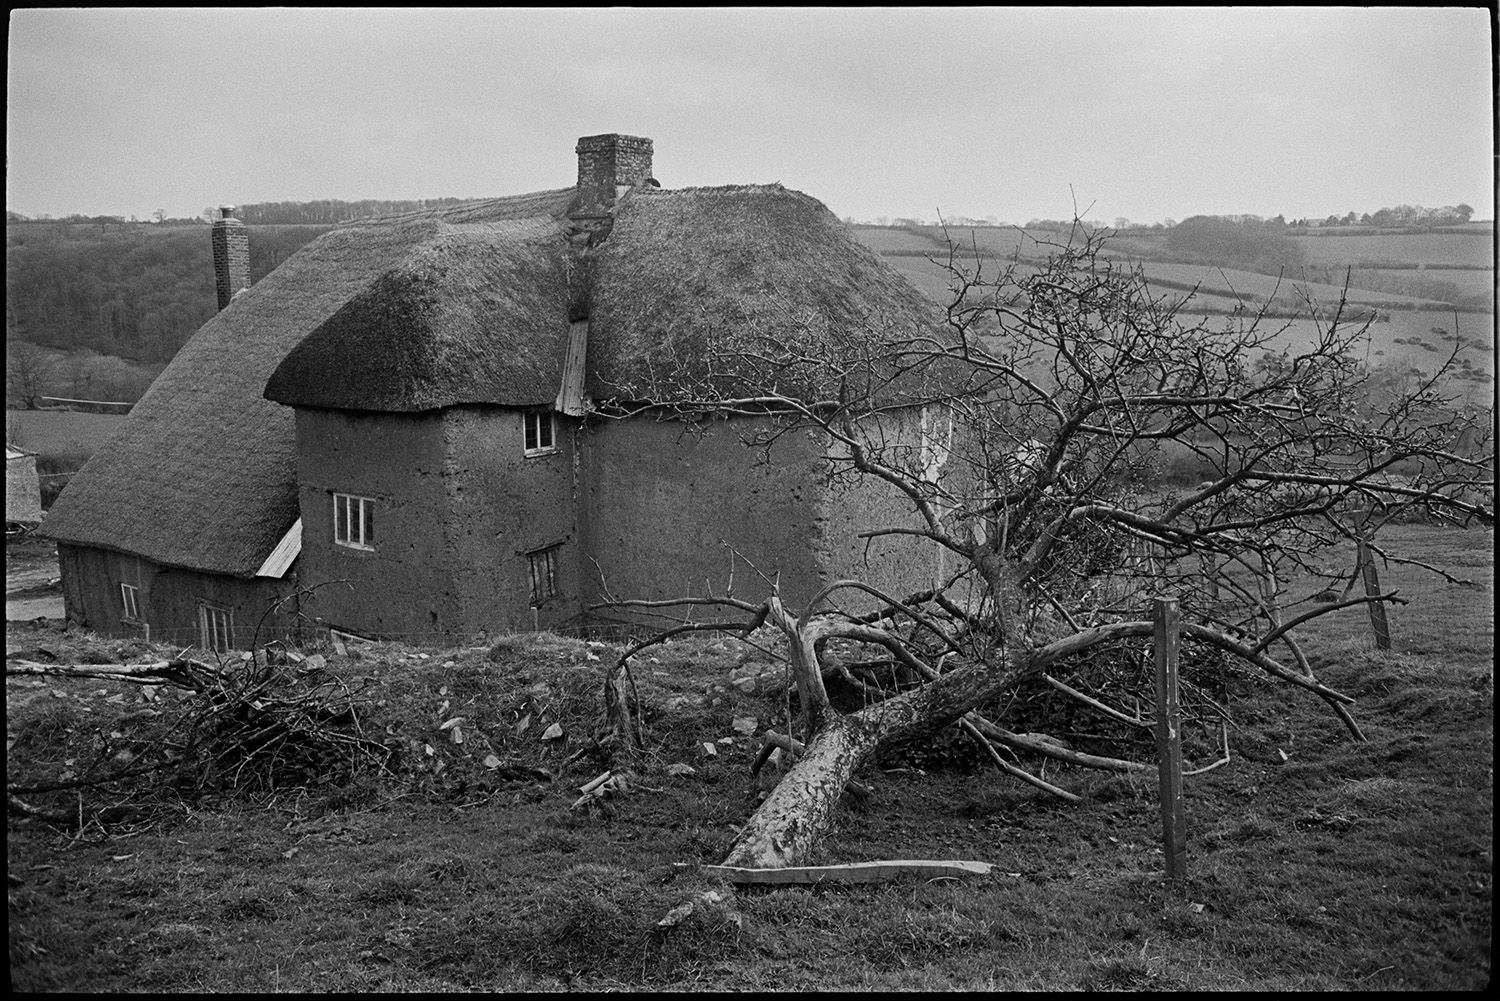 Thatch and cob farmhouse with lambs penned in front garden.
[The rear of a large thatch and cob three storey farmhouse at Brookland, near Chulmleigh. There is a fallen apple tree and rubble behind the house with a landscape of fields and woods in the background.]